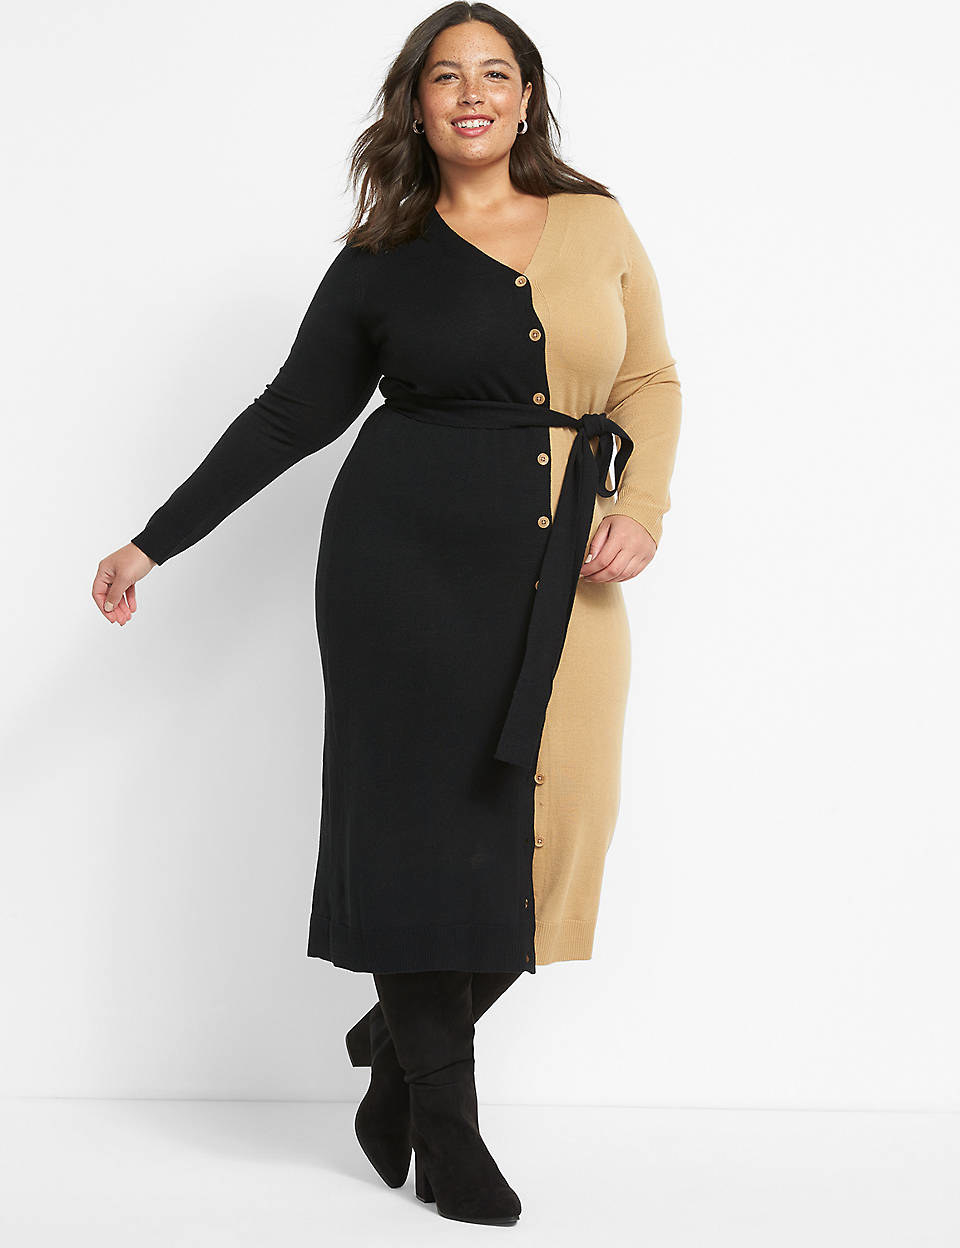 model in belted button front long sleeve dress that&#x27;s black on one side and tan on the other